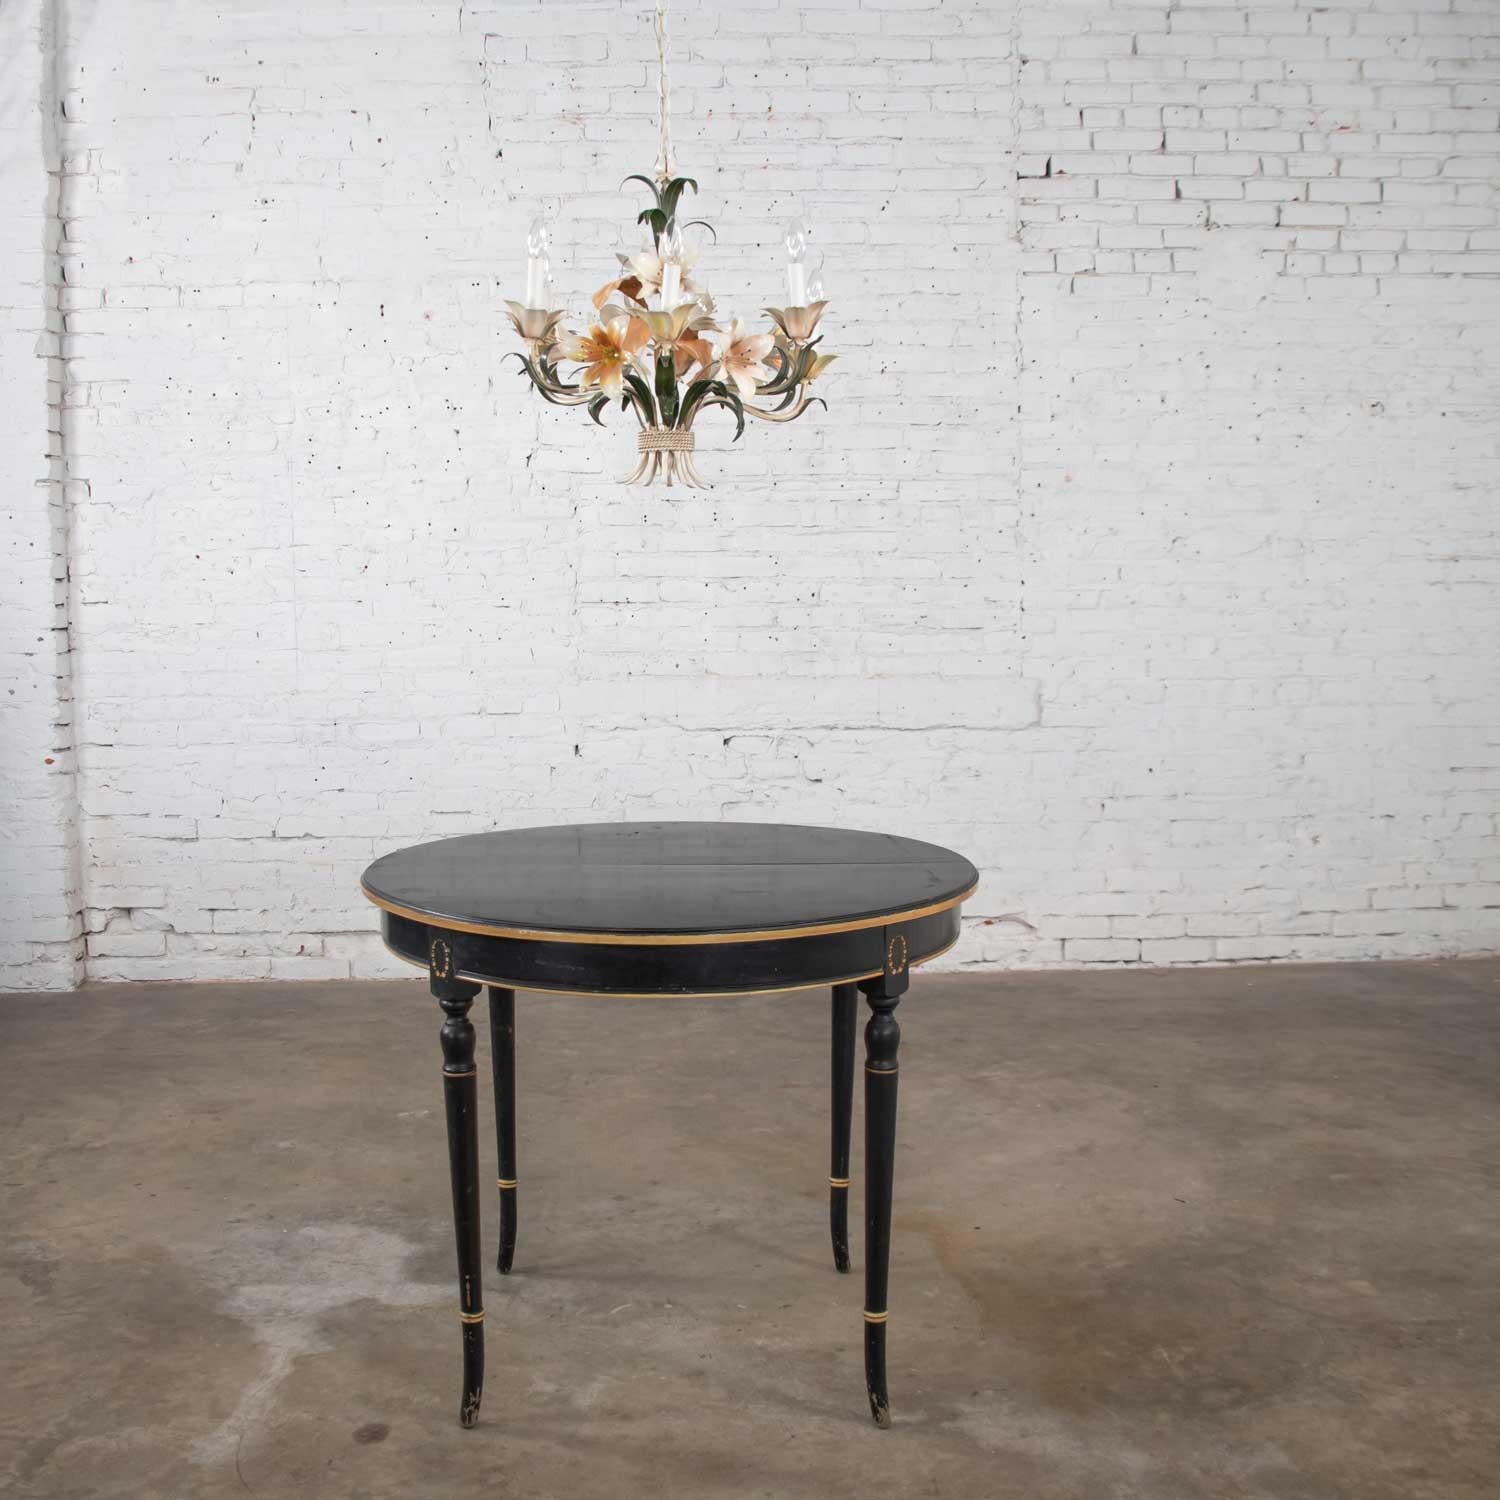 Round Neoclassical Dining Table Center Table Black Age-Distressed Finish w/ Gold 4